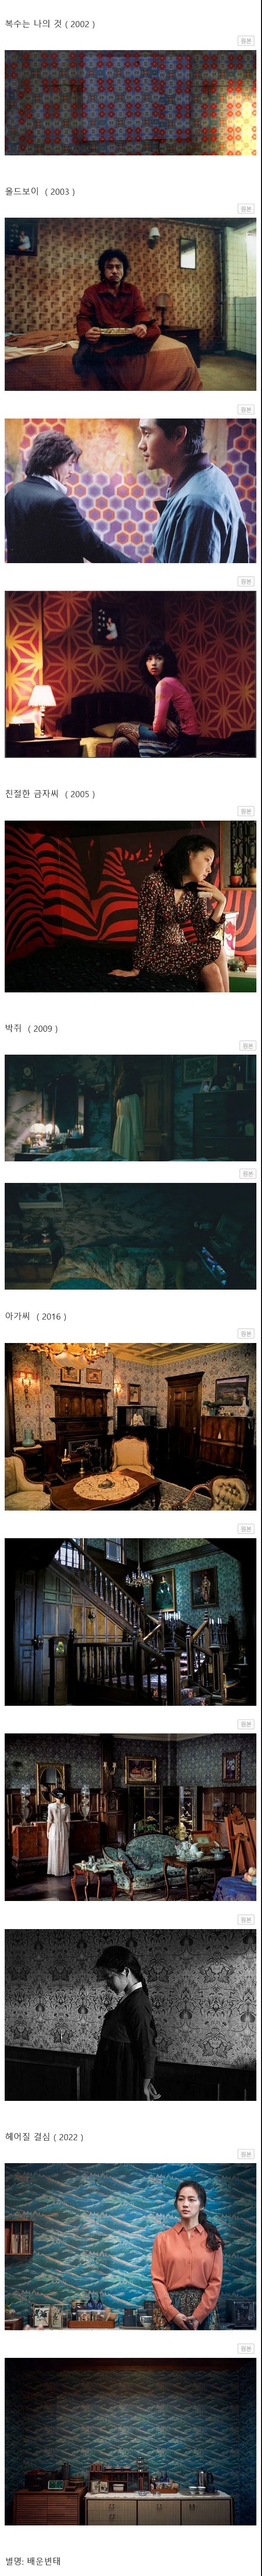 Director Park Chan-wook is serious about the wallpaper